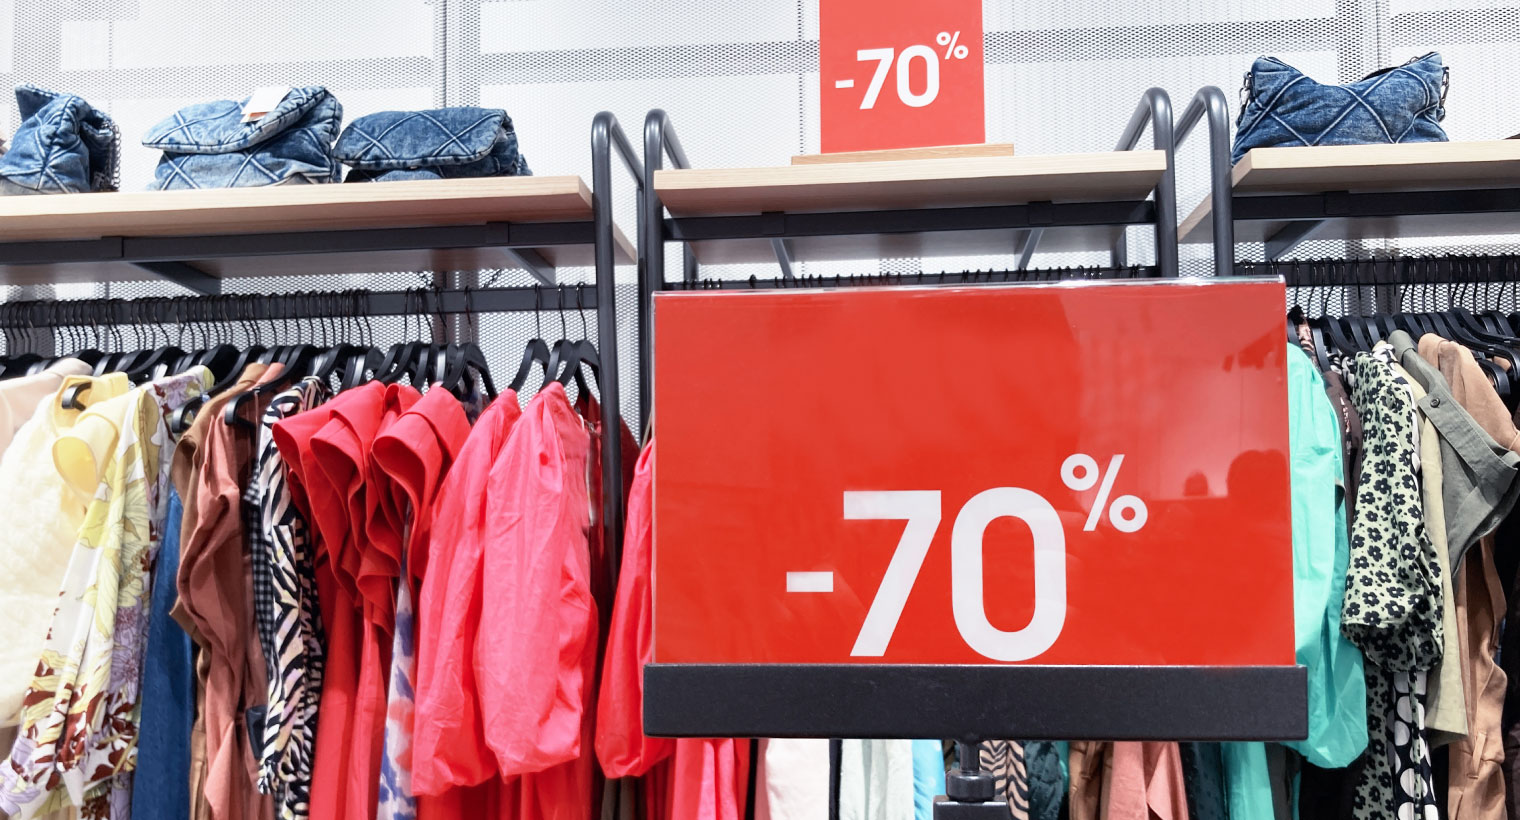 Why Retail Price Optimization is a Priority Now and in the Years Ahead